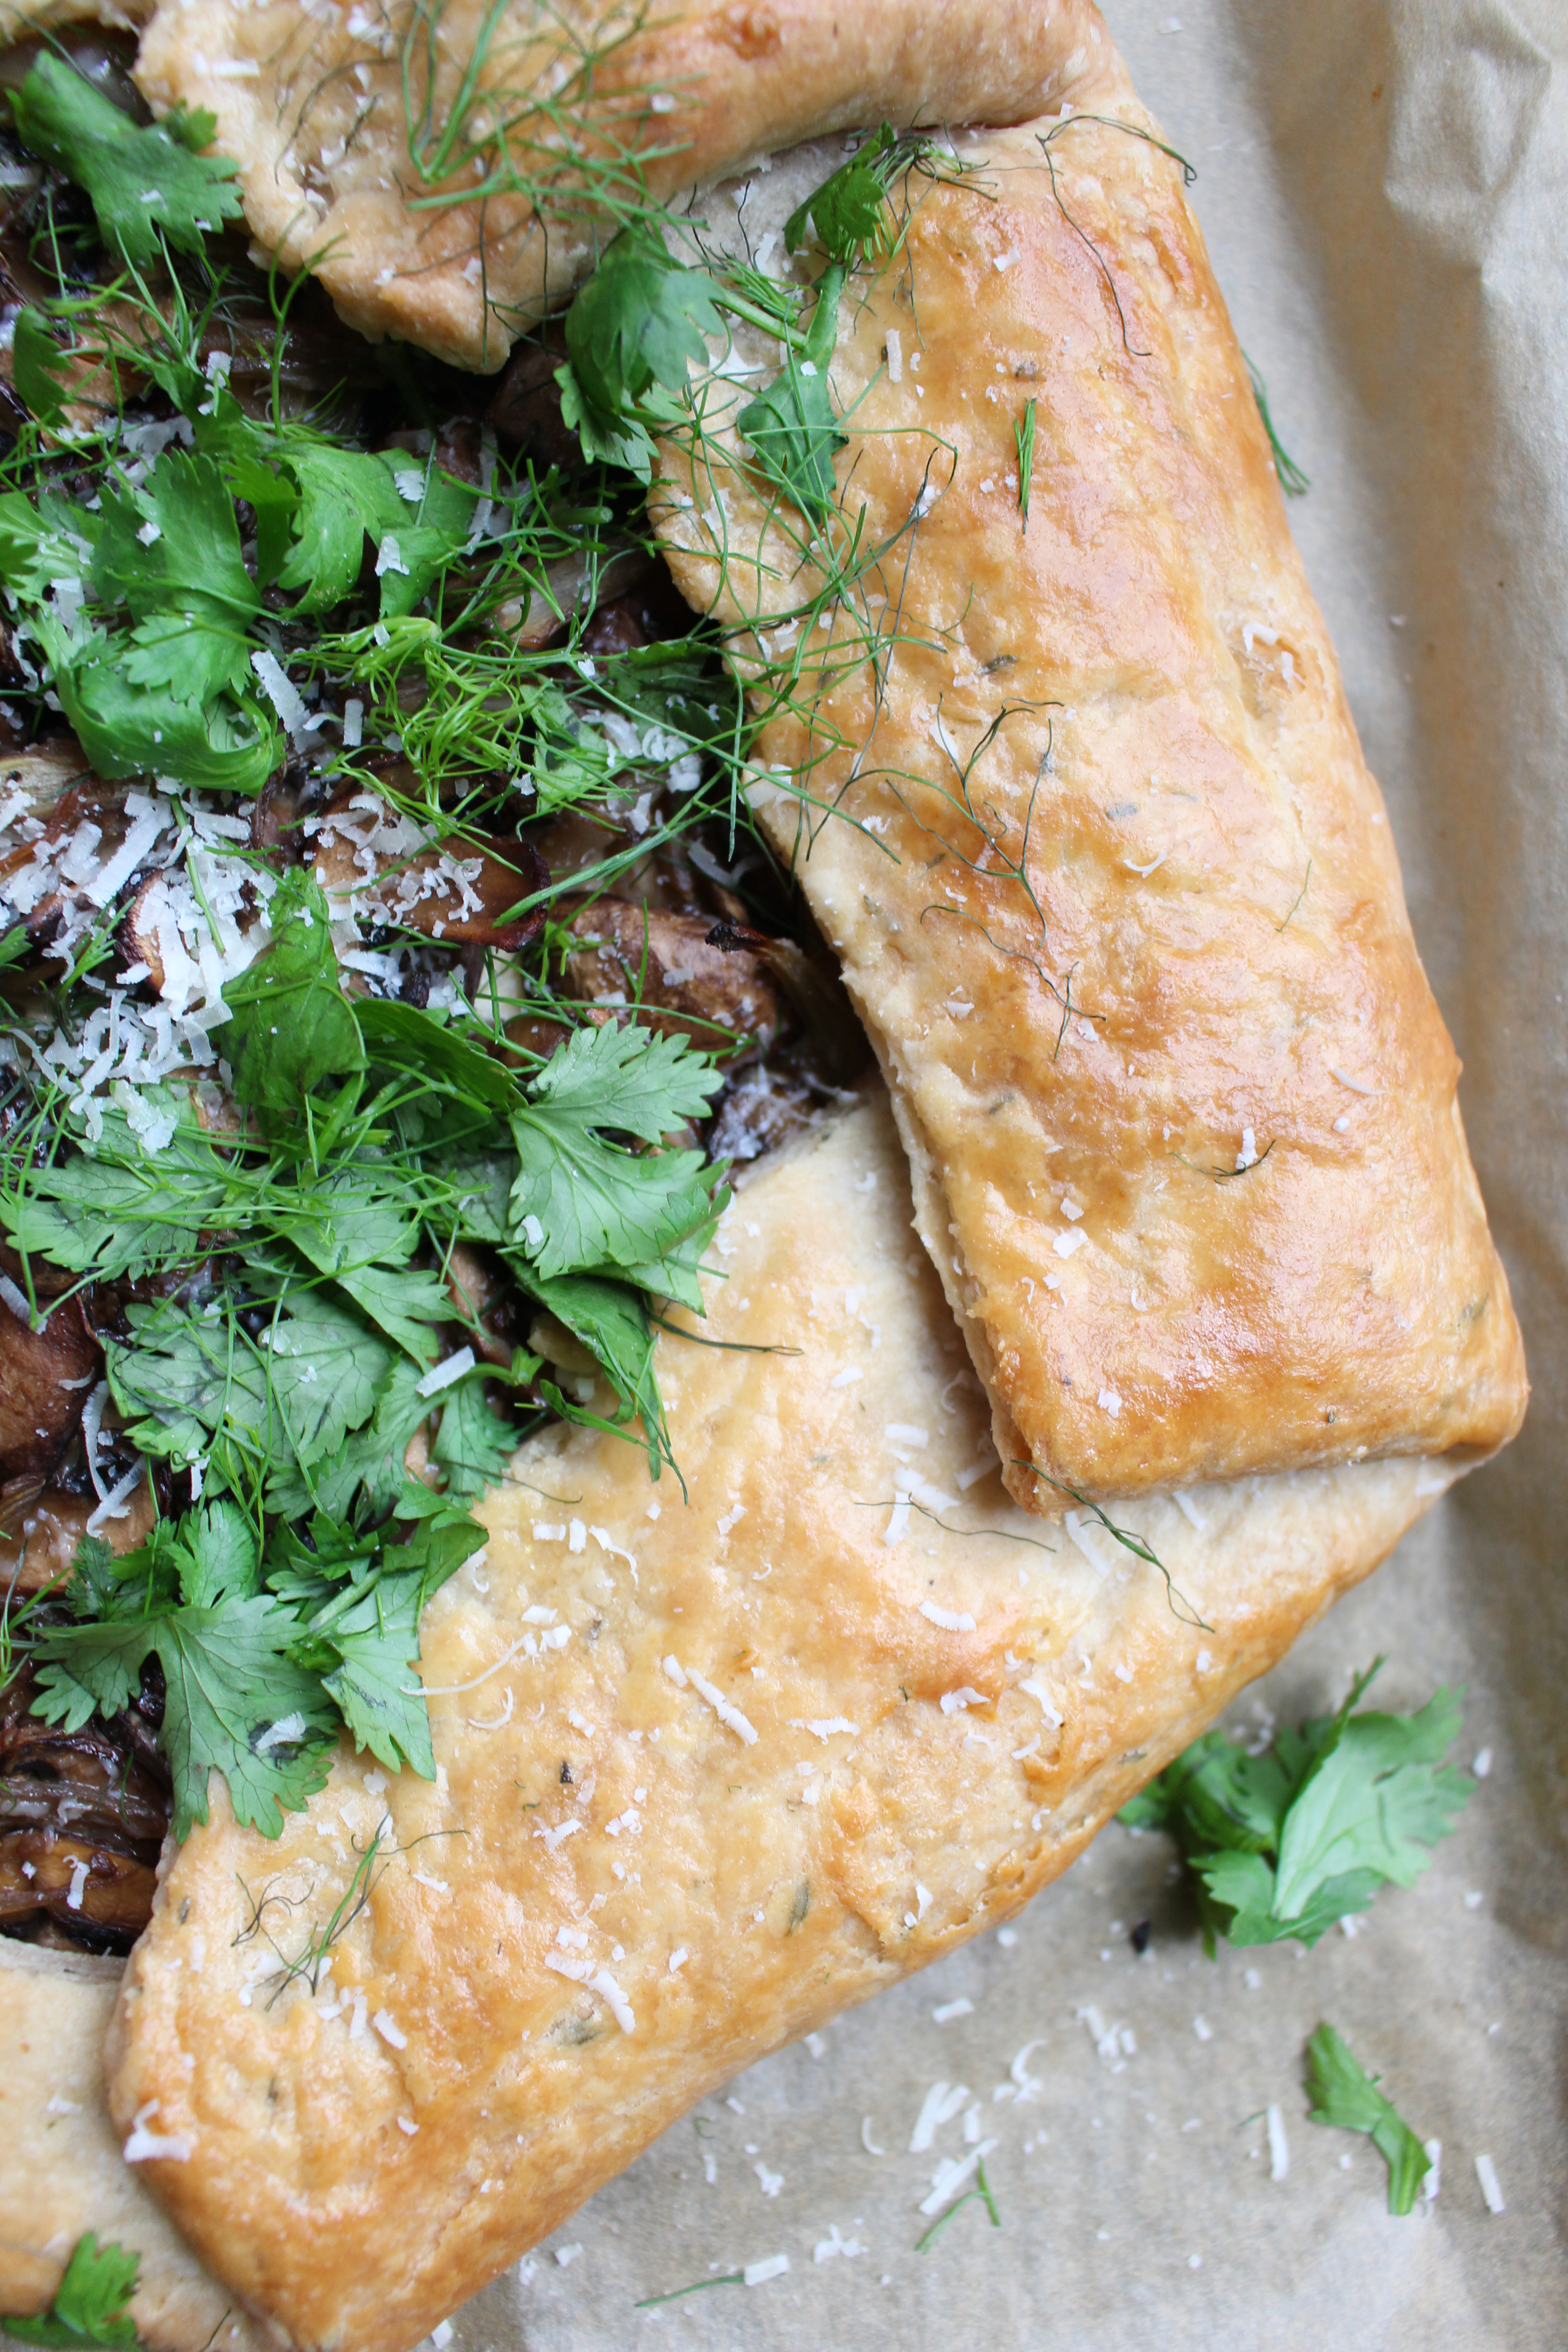 The fluffiest, flaky crust stuffed with ricotta, mushrooms, and fennel. This galette is beautiful and surprisingly simple!